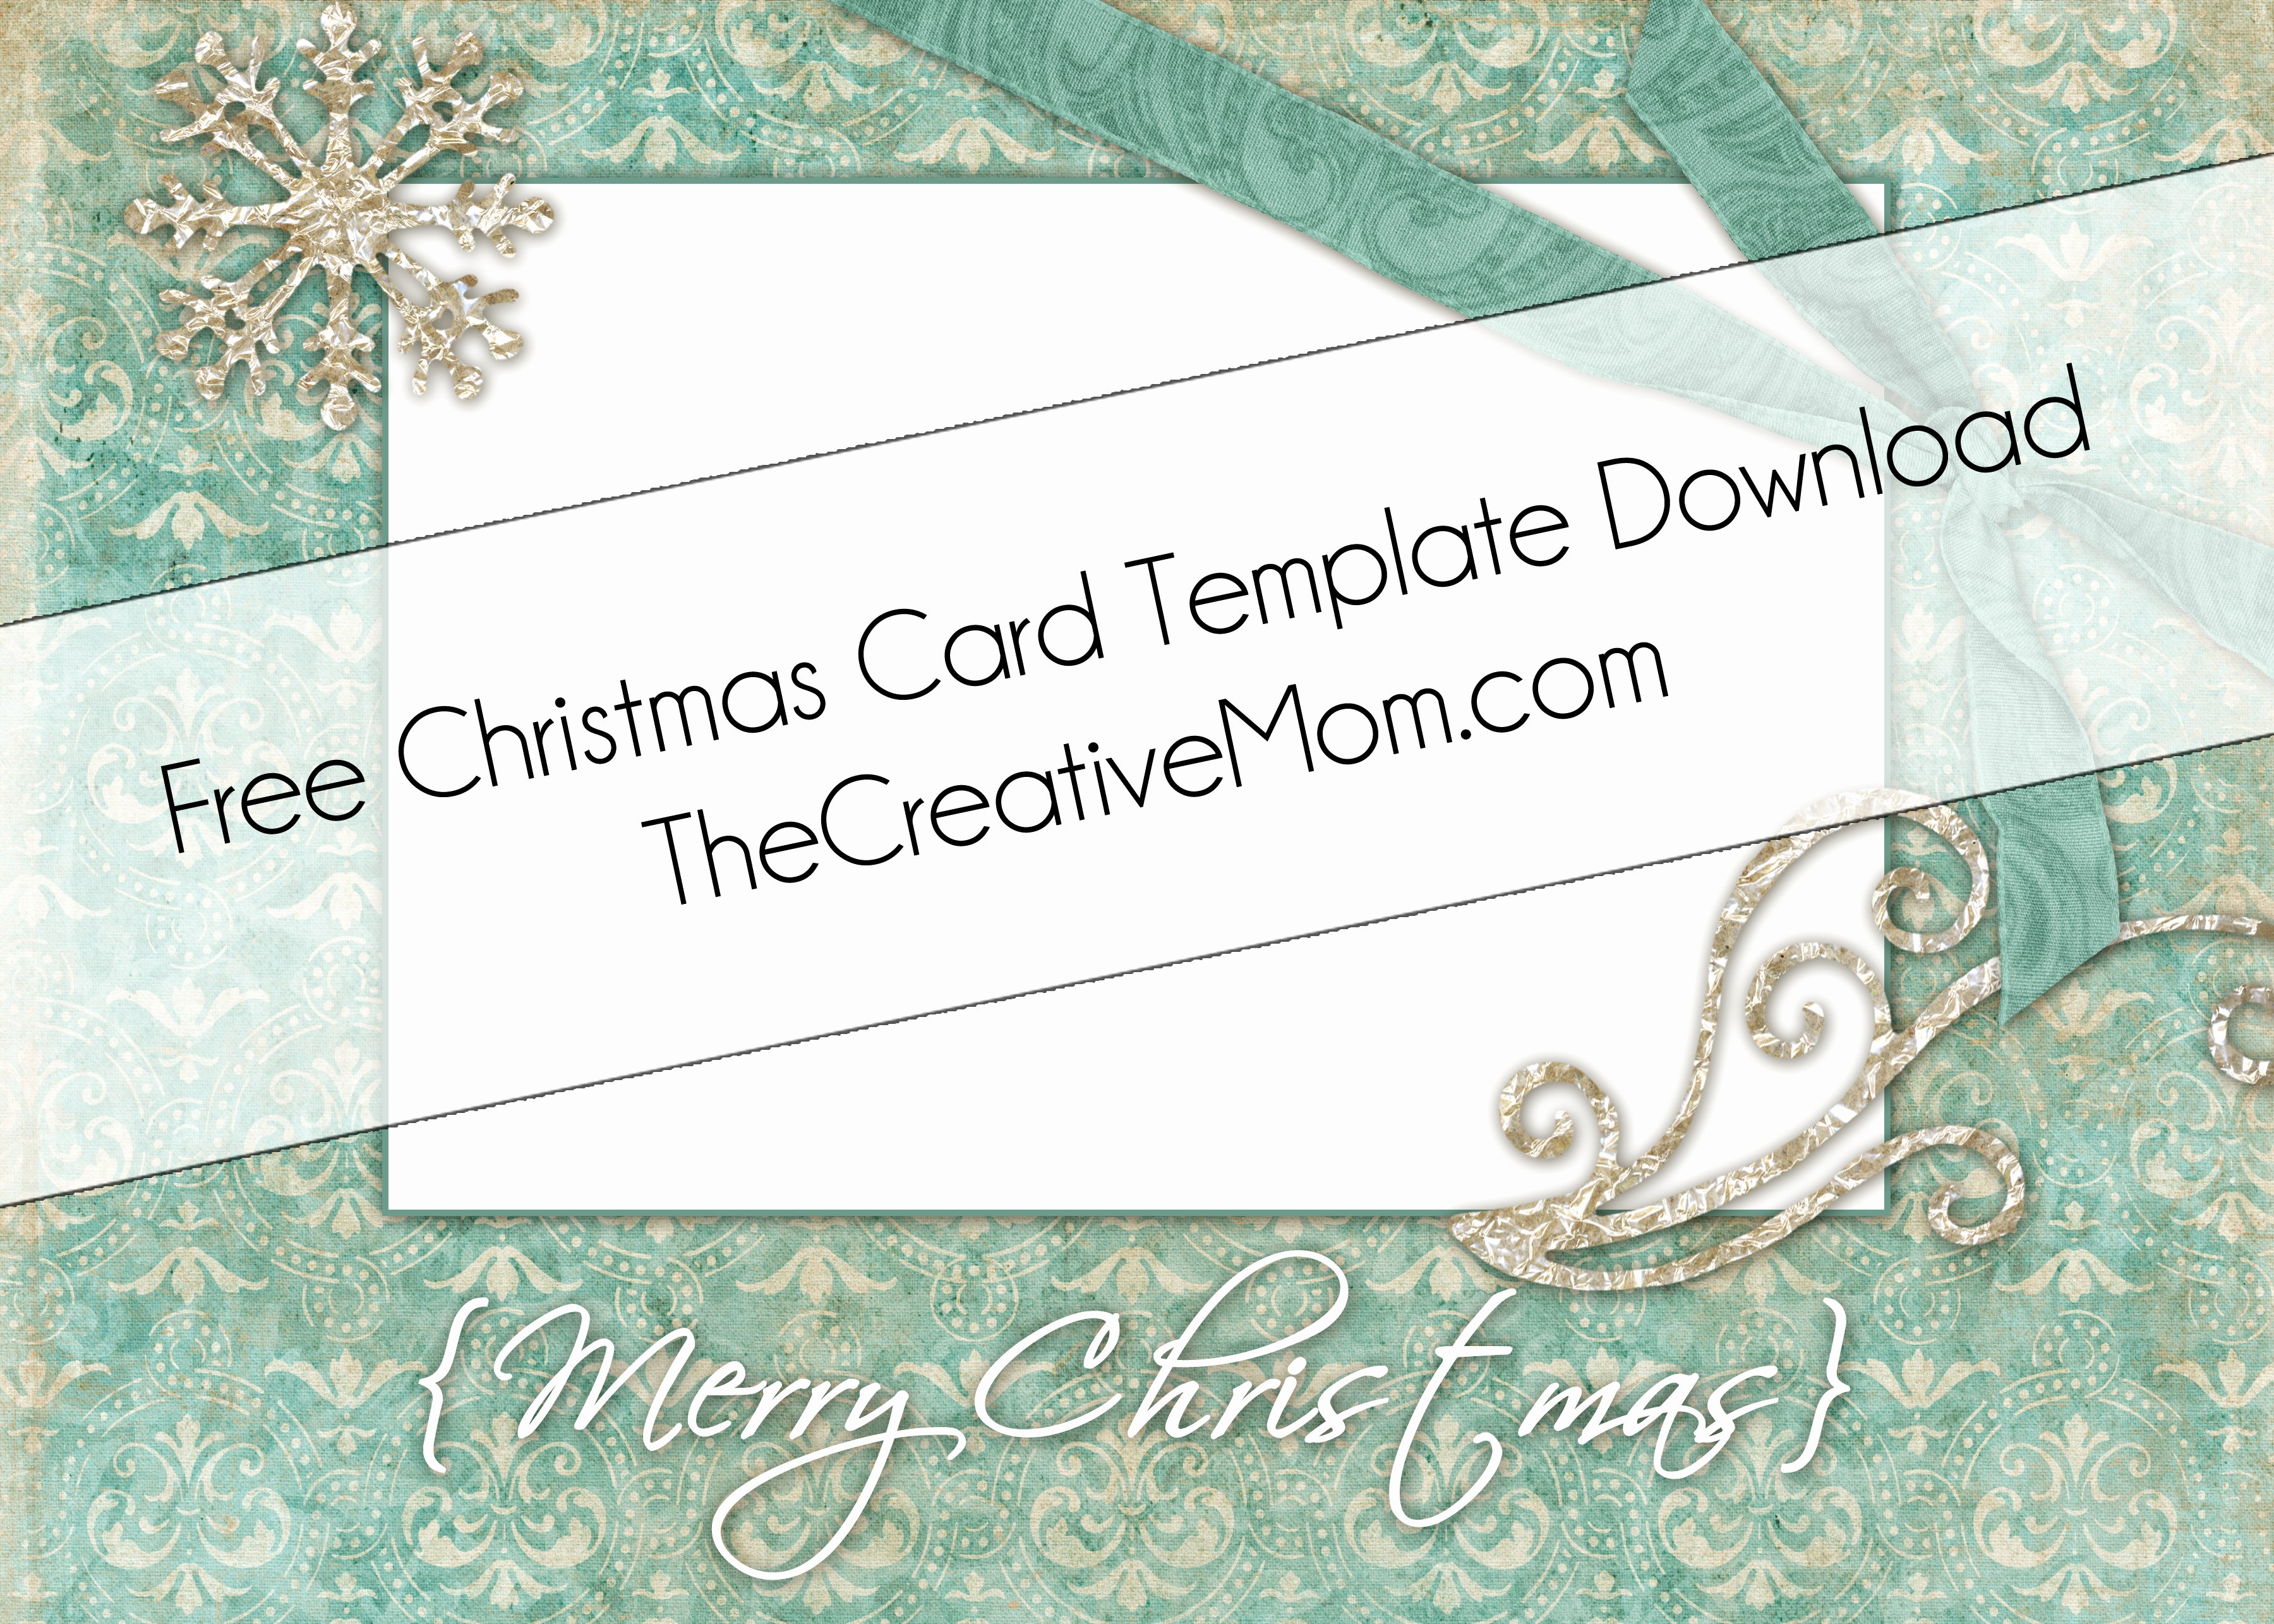 Christmas Card Templates Free Download the Creative Mom